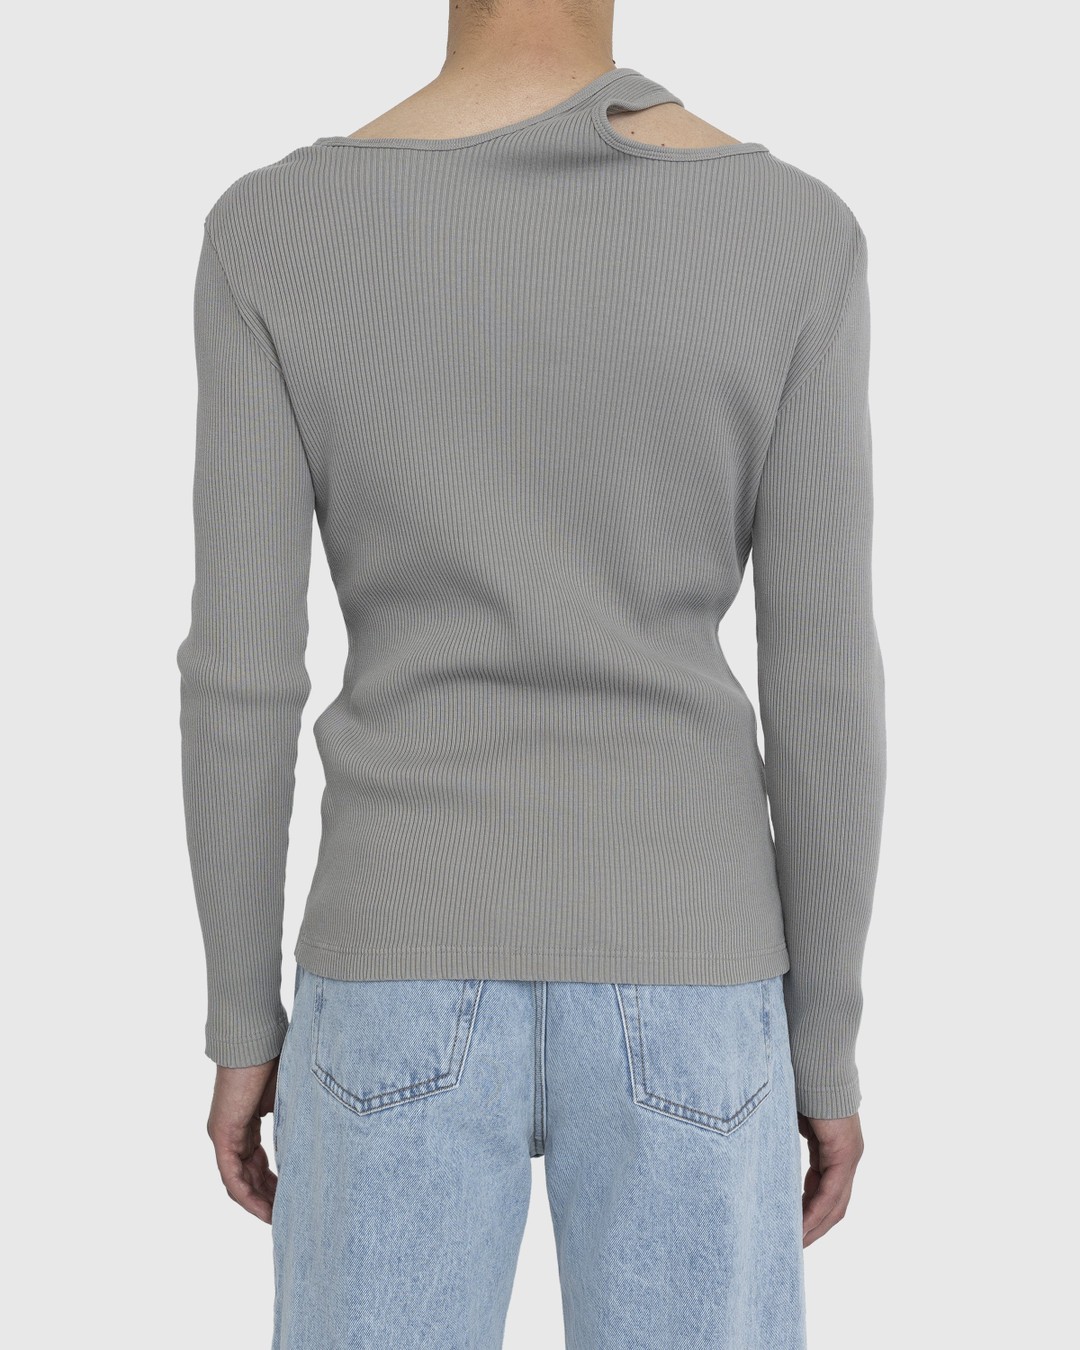 Y/Project – Classic Double Collar T-Shirt Taupe - T-shirts - Grey - Image 4